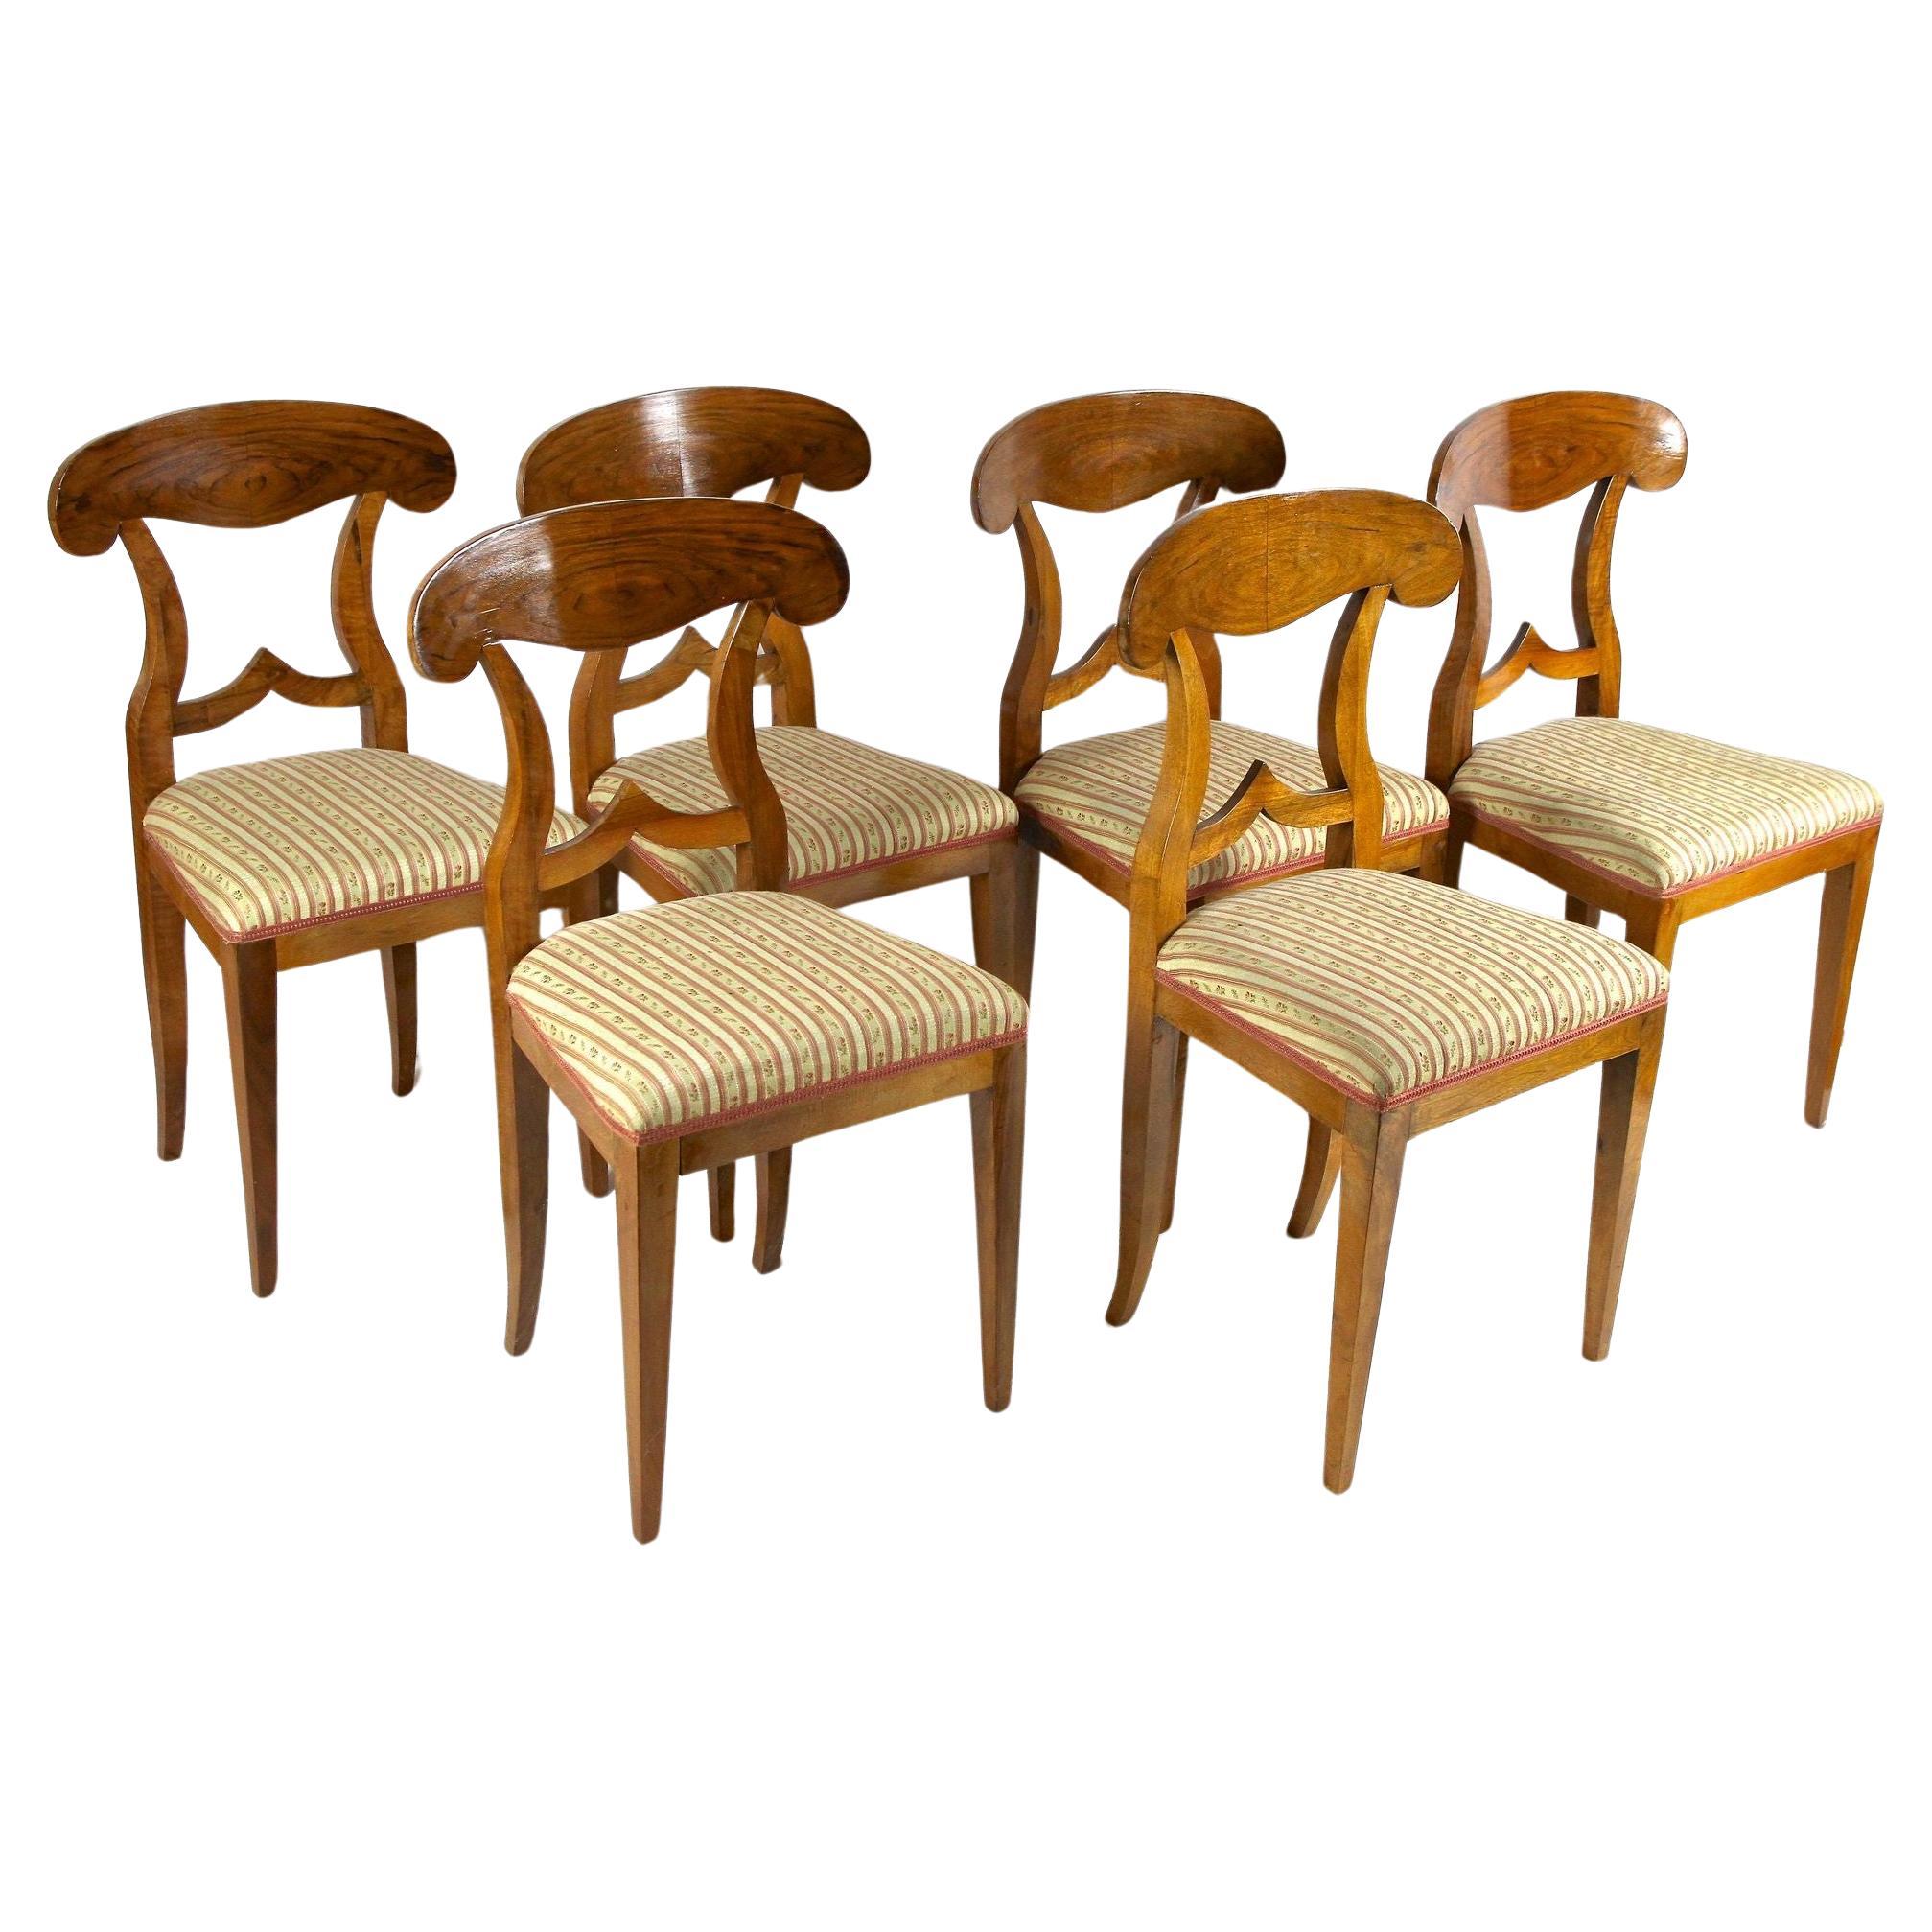 Set Of 6 Biedermeier Nutwood Shovel Dining Chairs, 19th Century, AT ca. 1830